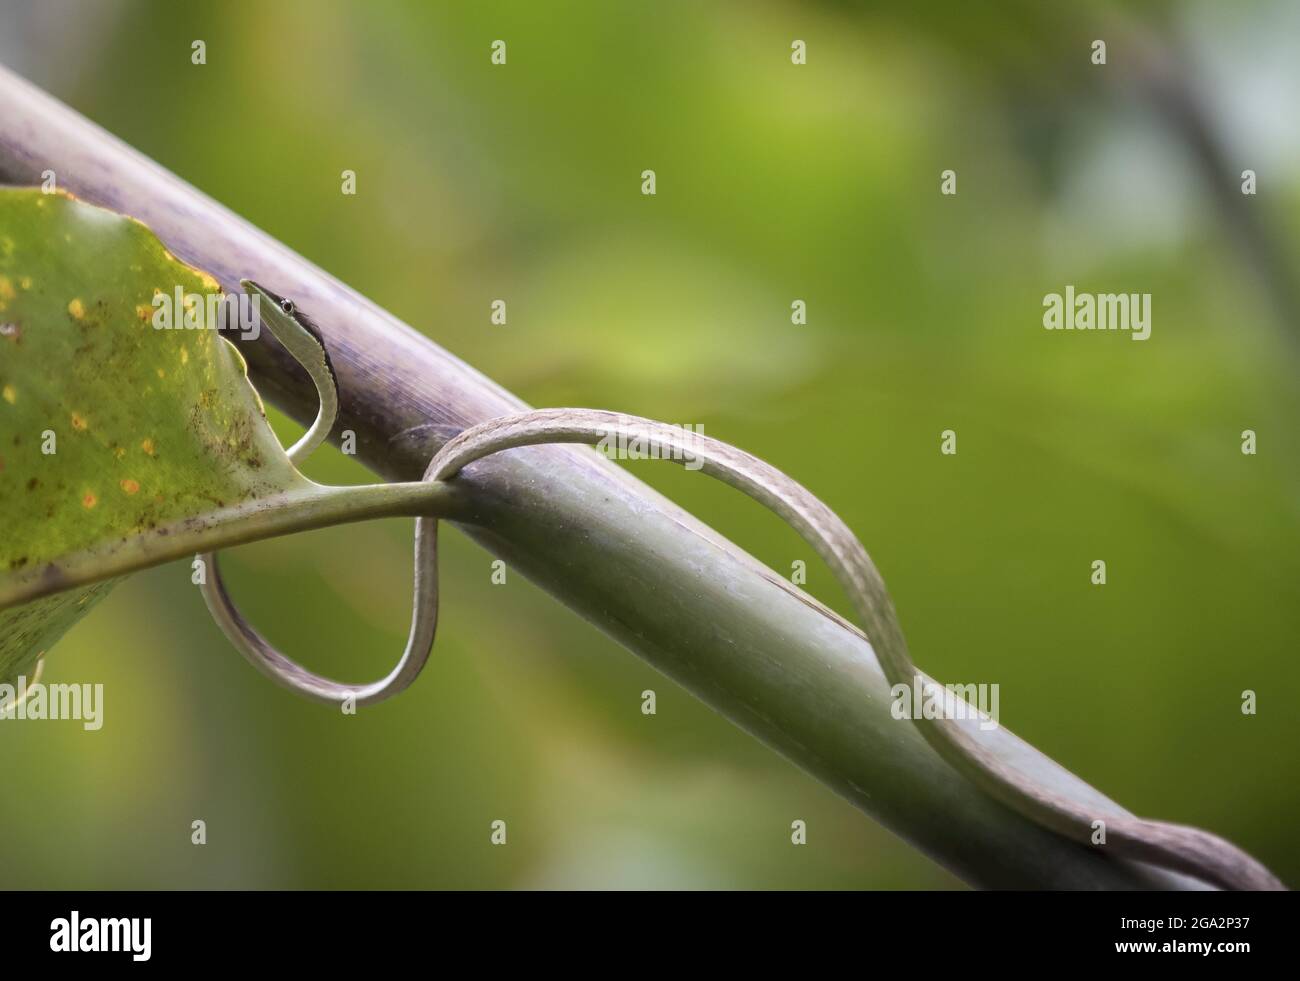 A Brown vine snake (Oxybelis aeneus) slithers along a tree branch in the forest; Puntarenas, Costa Rica Stock Photo